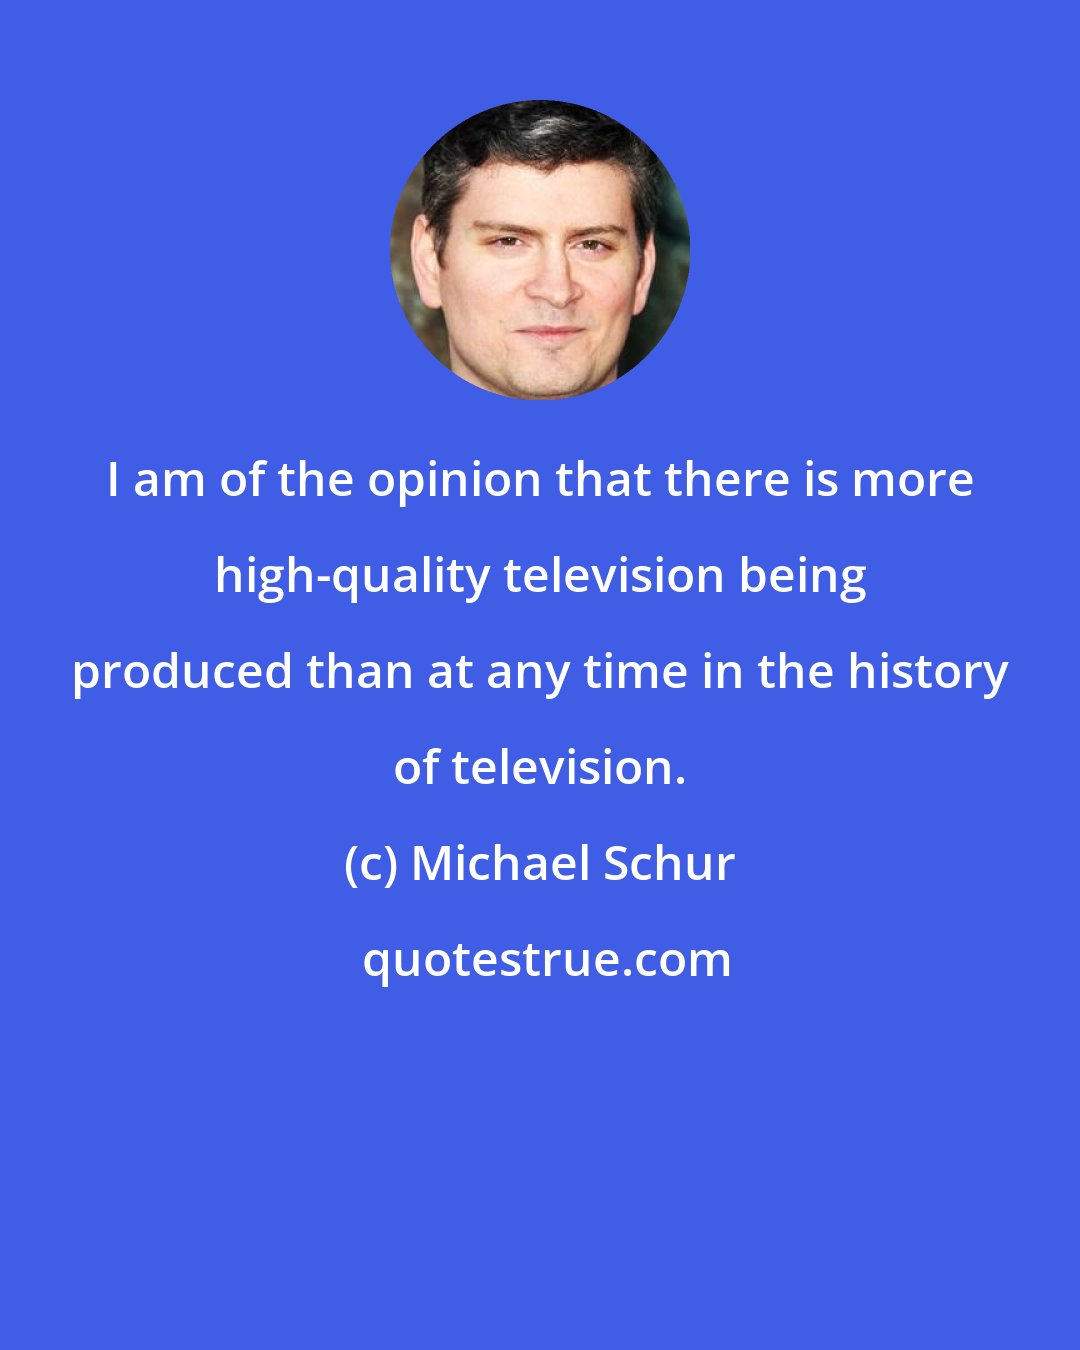 Michael Schur: I am of the opinion that there is more high-quality television being produced than at any time in the history of television.